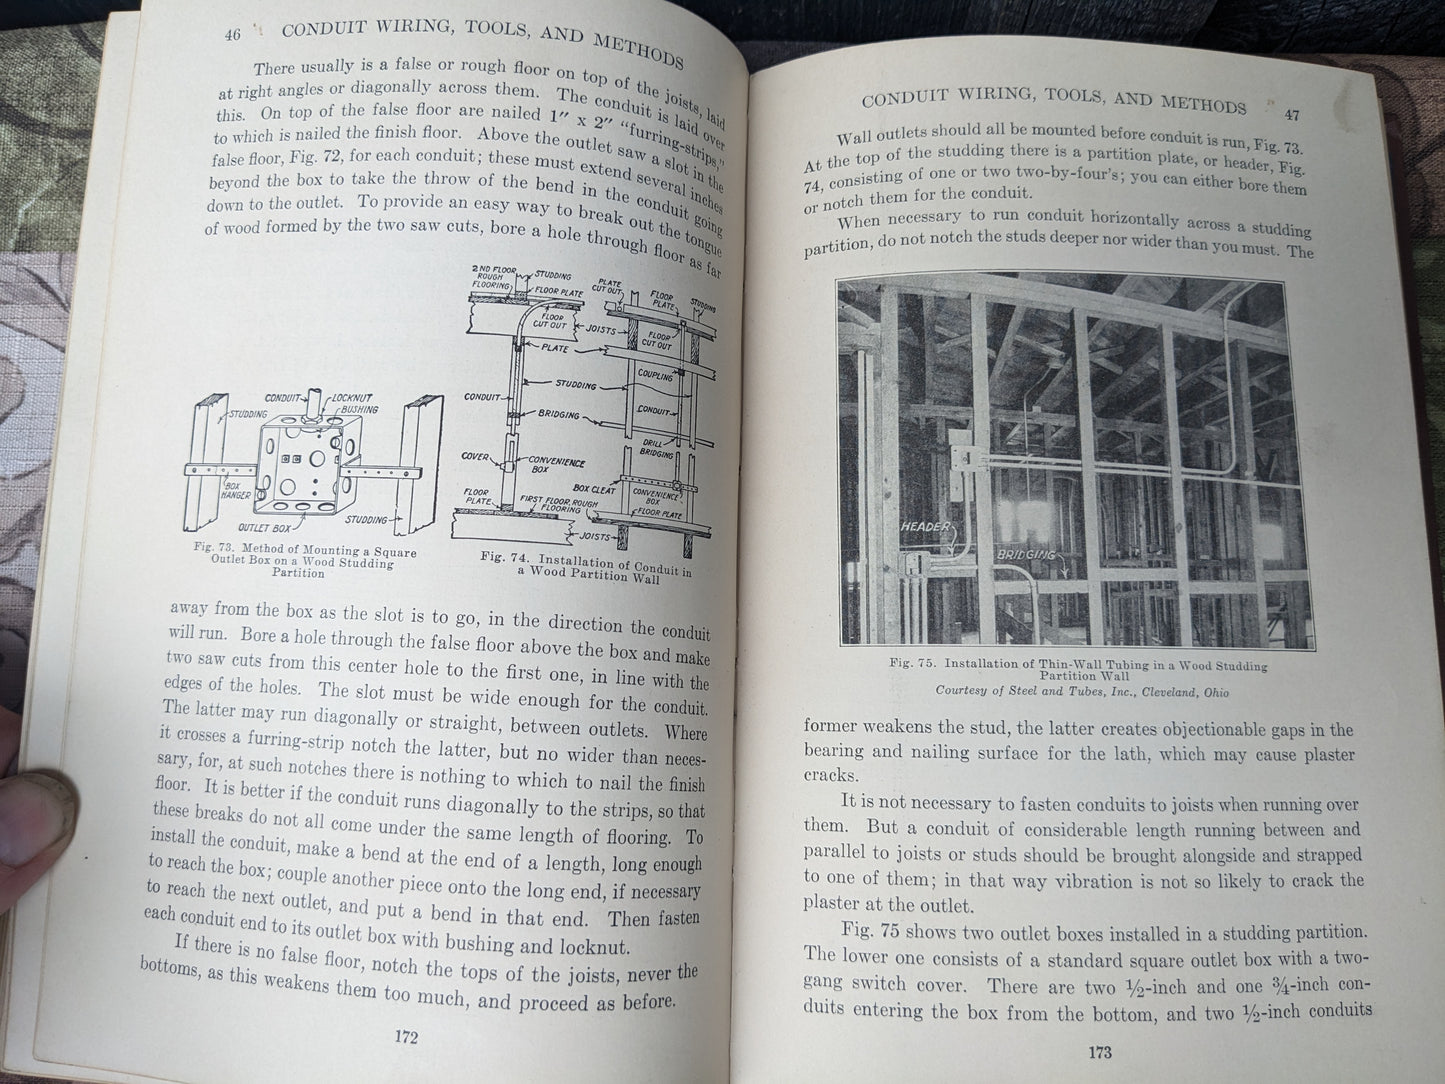 Vintage Indoor Electric Wiring and Estimating by Uhl, Nelson and Dunlap, 1940 edition